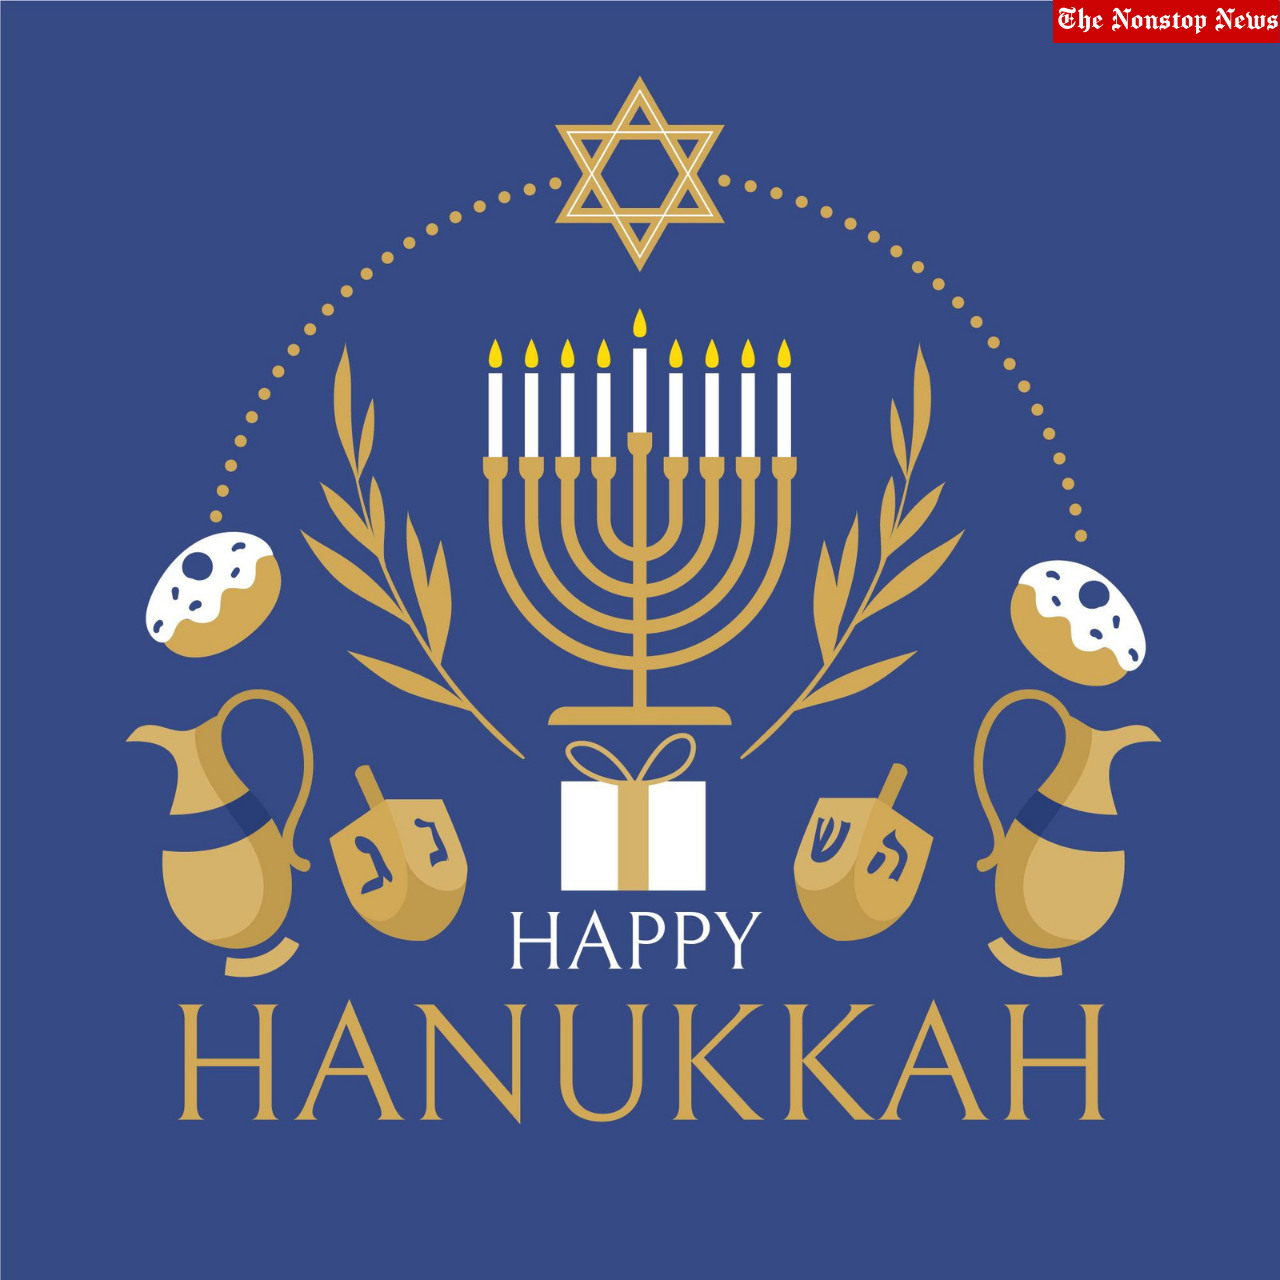 Hanukkah 2021 Instagram Captions, WhatsApp Status, Facebook Messages, Twitter Posts, and Messages to Share